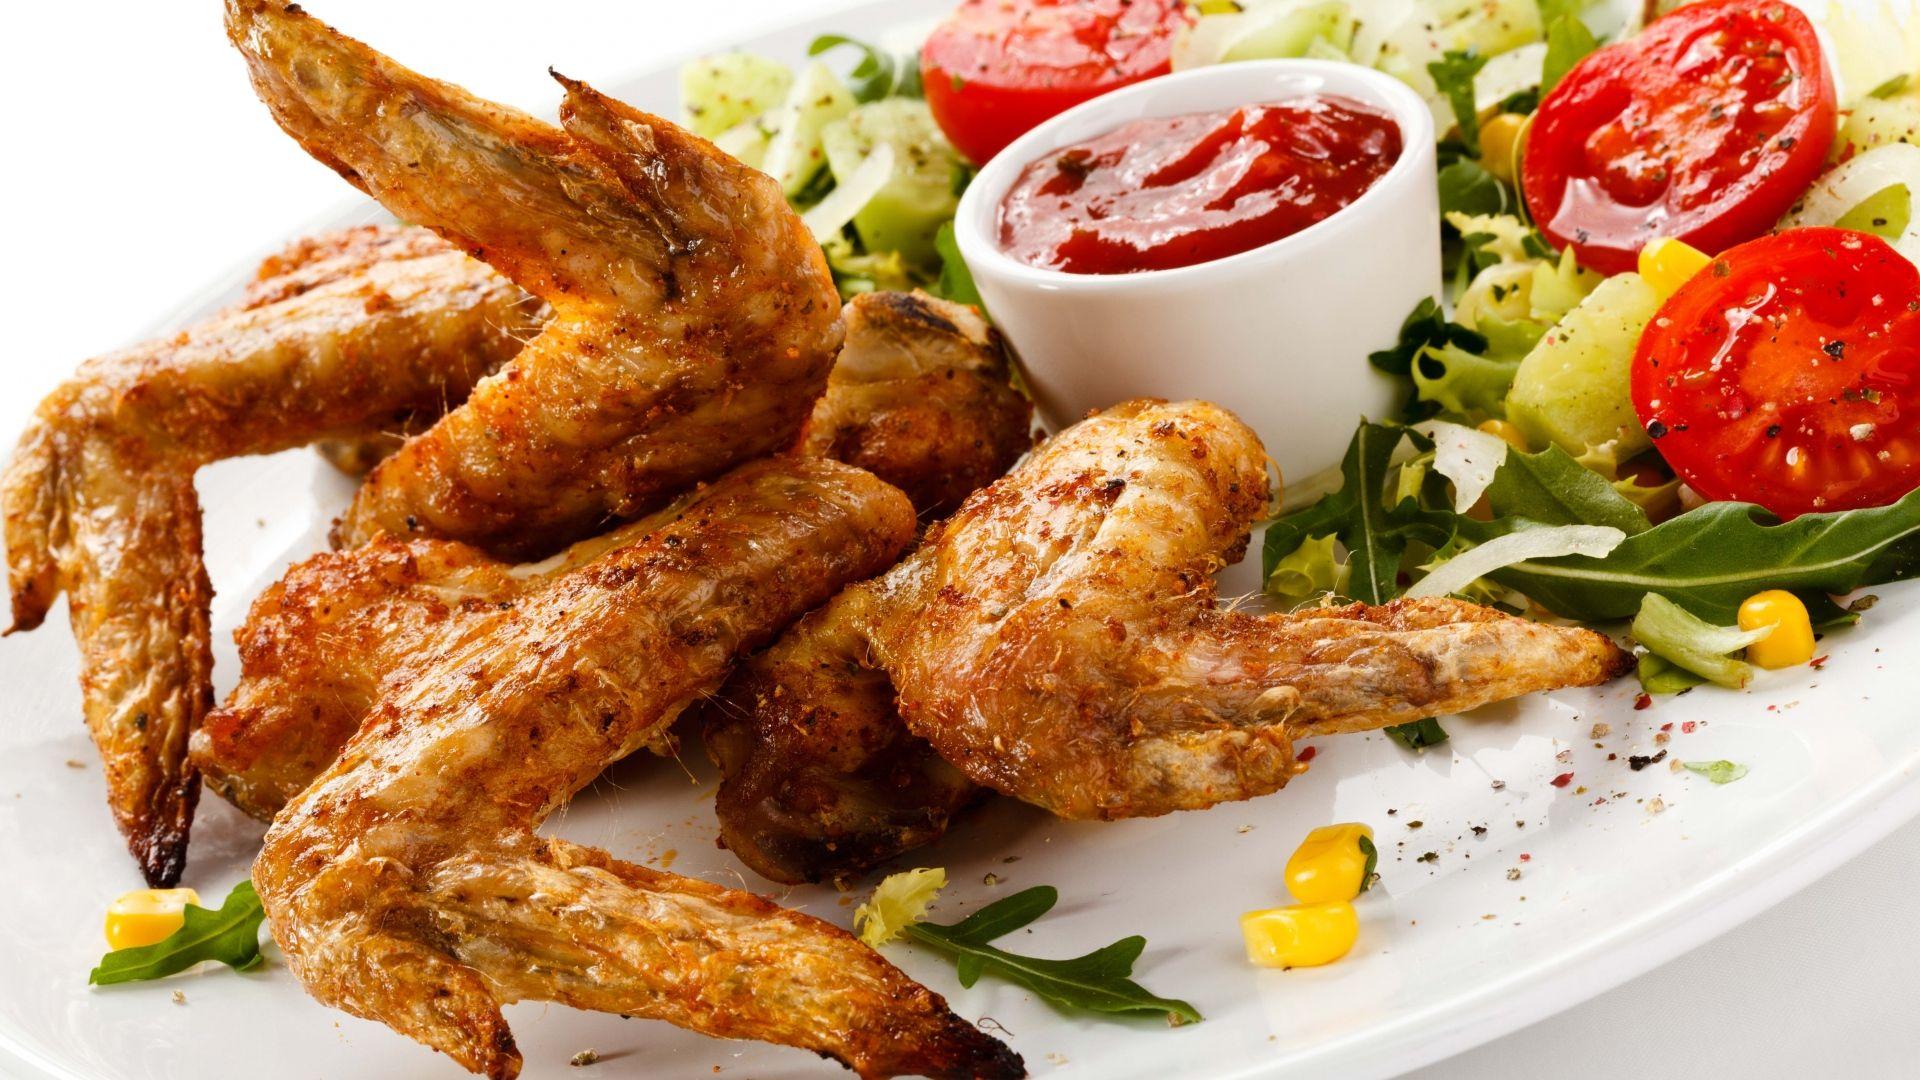 Download Wallpaper 1920x1080 Chicken wings, Plate, Ketchup